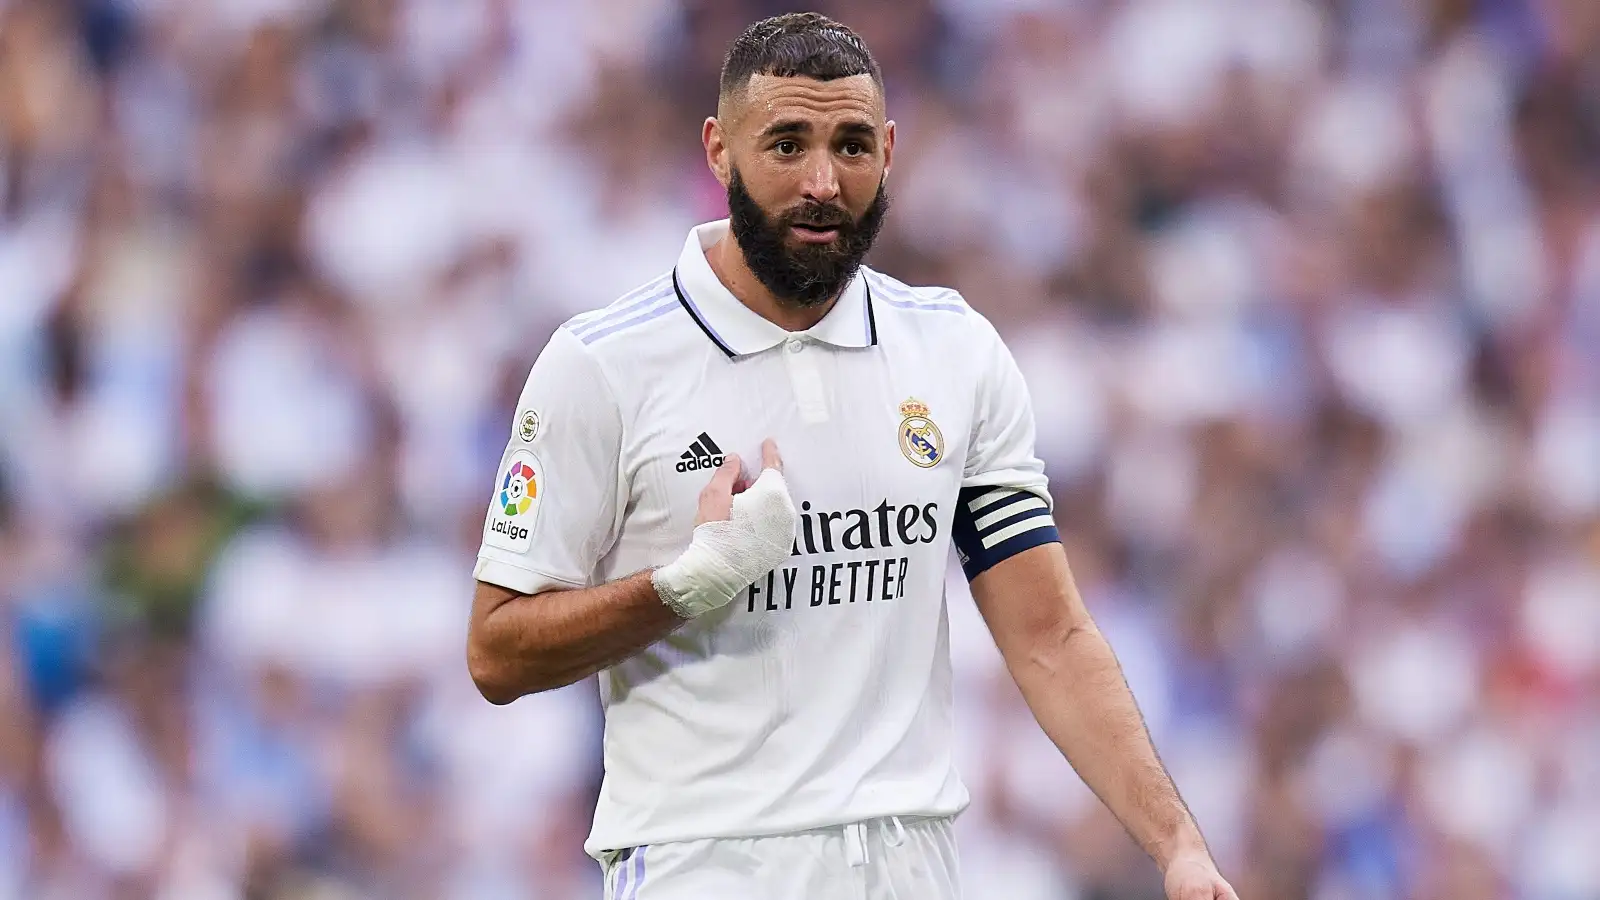 ‘CR7 was in love with him’: 13 quotes to sum up Benzema’s brilliance